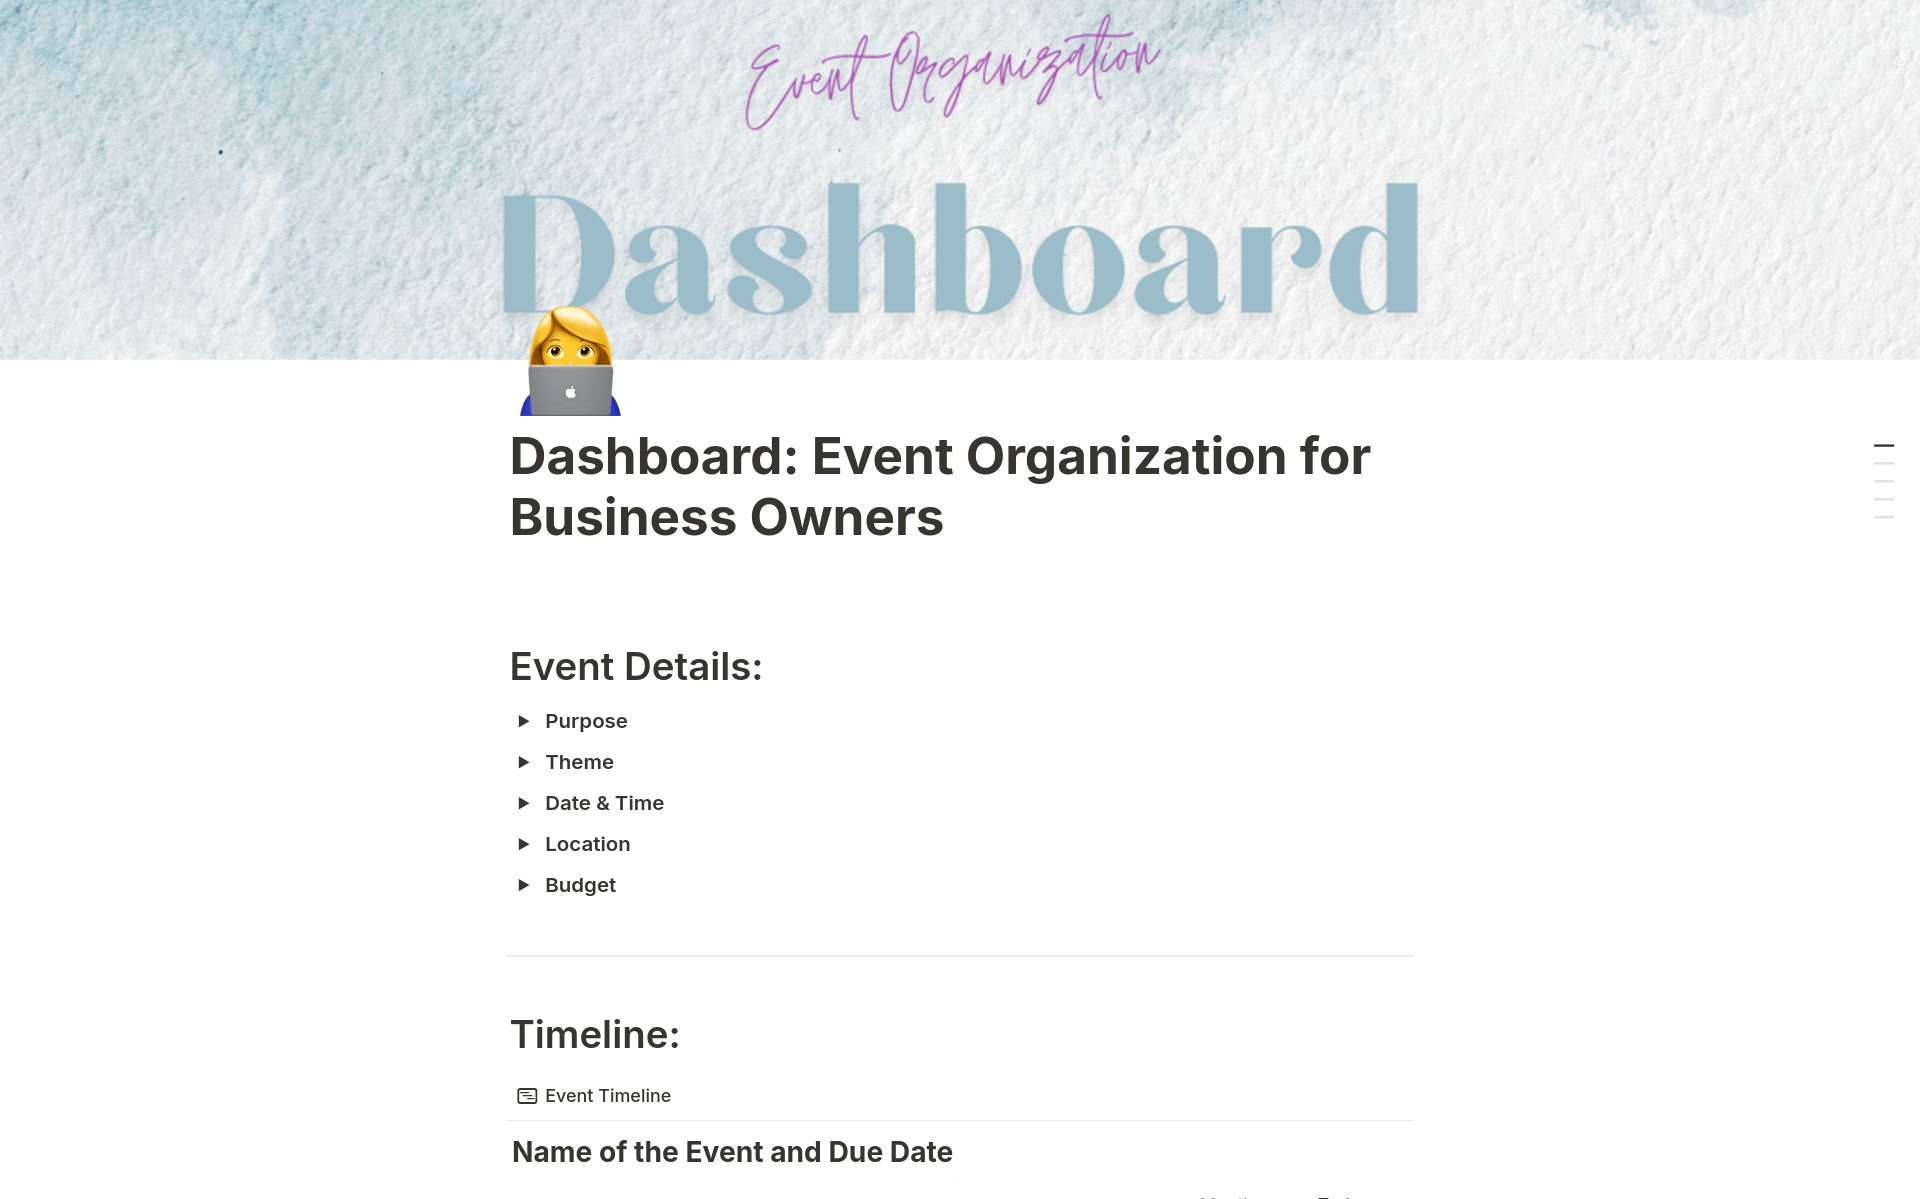 Dashboard Event Organization for Business Ownersのテンプレートのプレビュー